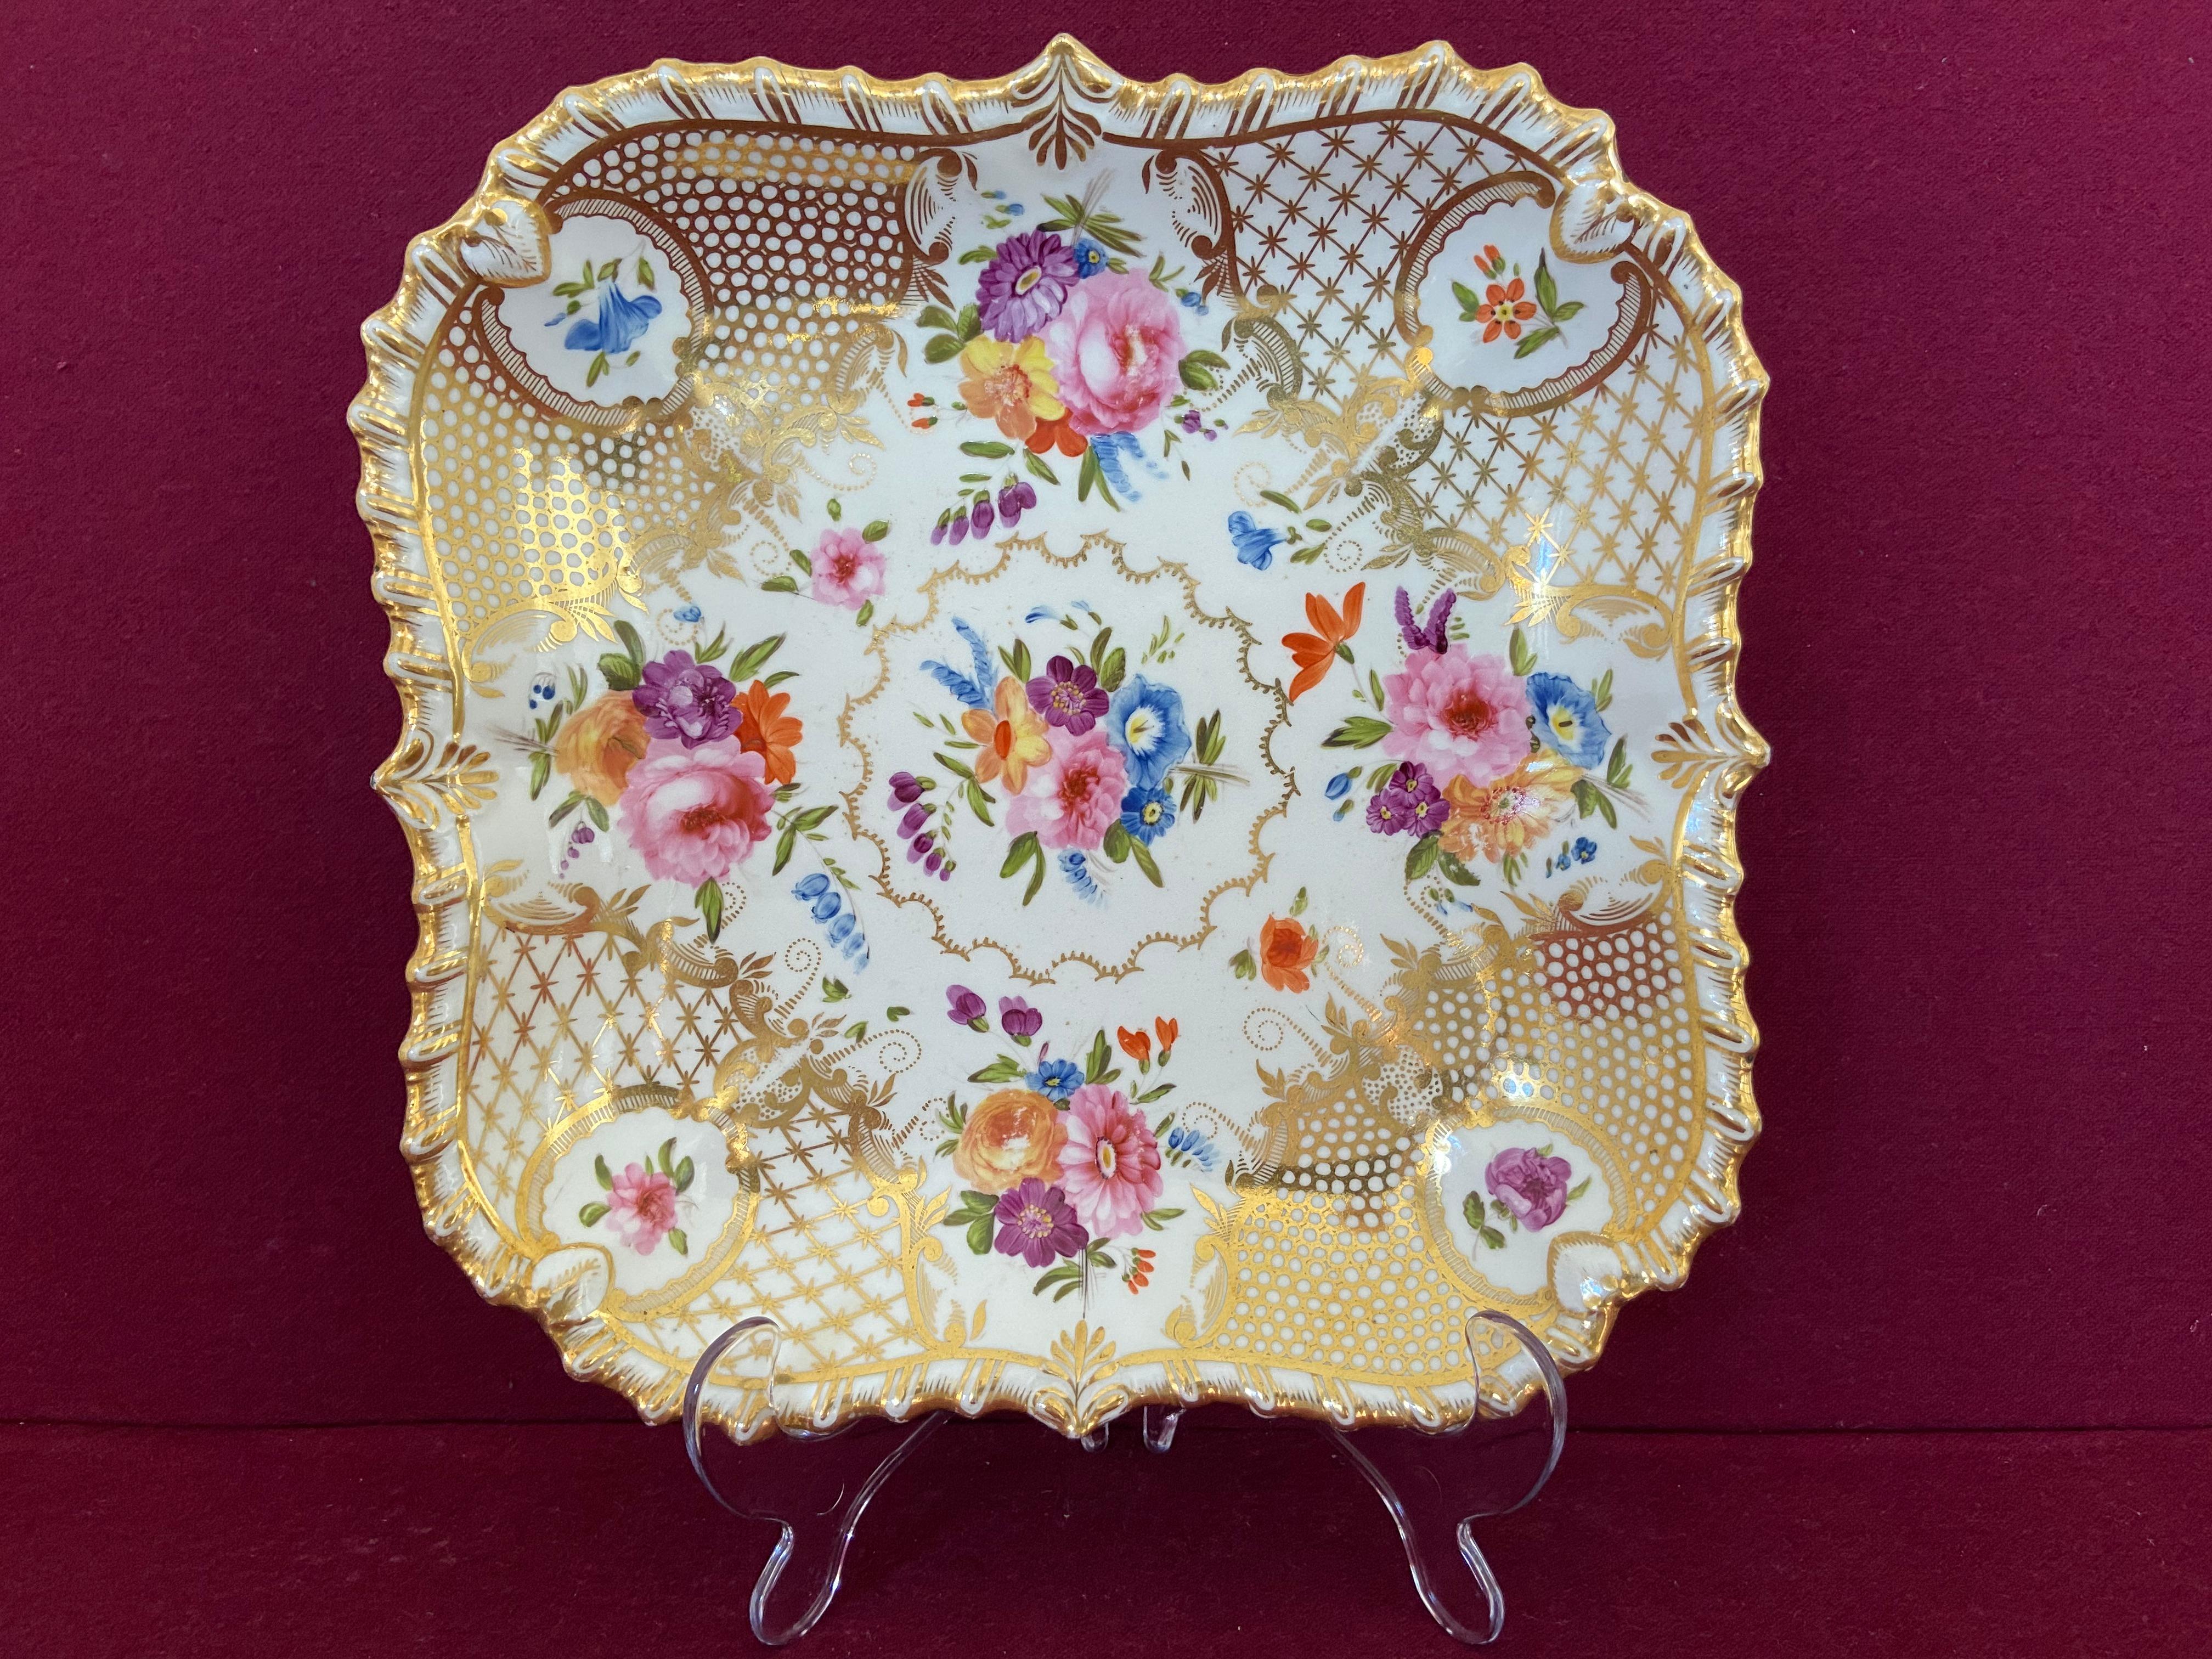 A Coalport 'Union' shape dessert dish c.1820-1830. Finely decorated with flowers and profusely gilded.

Condition: Excellent. Minor wear from use.

Similar dessert wares are illustrated on plates 138/139 in Geoffrey Godden's book on Coalport